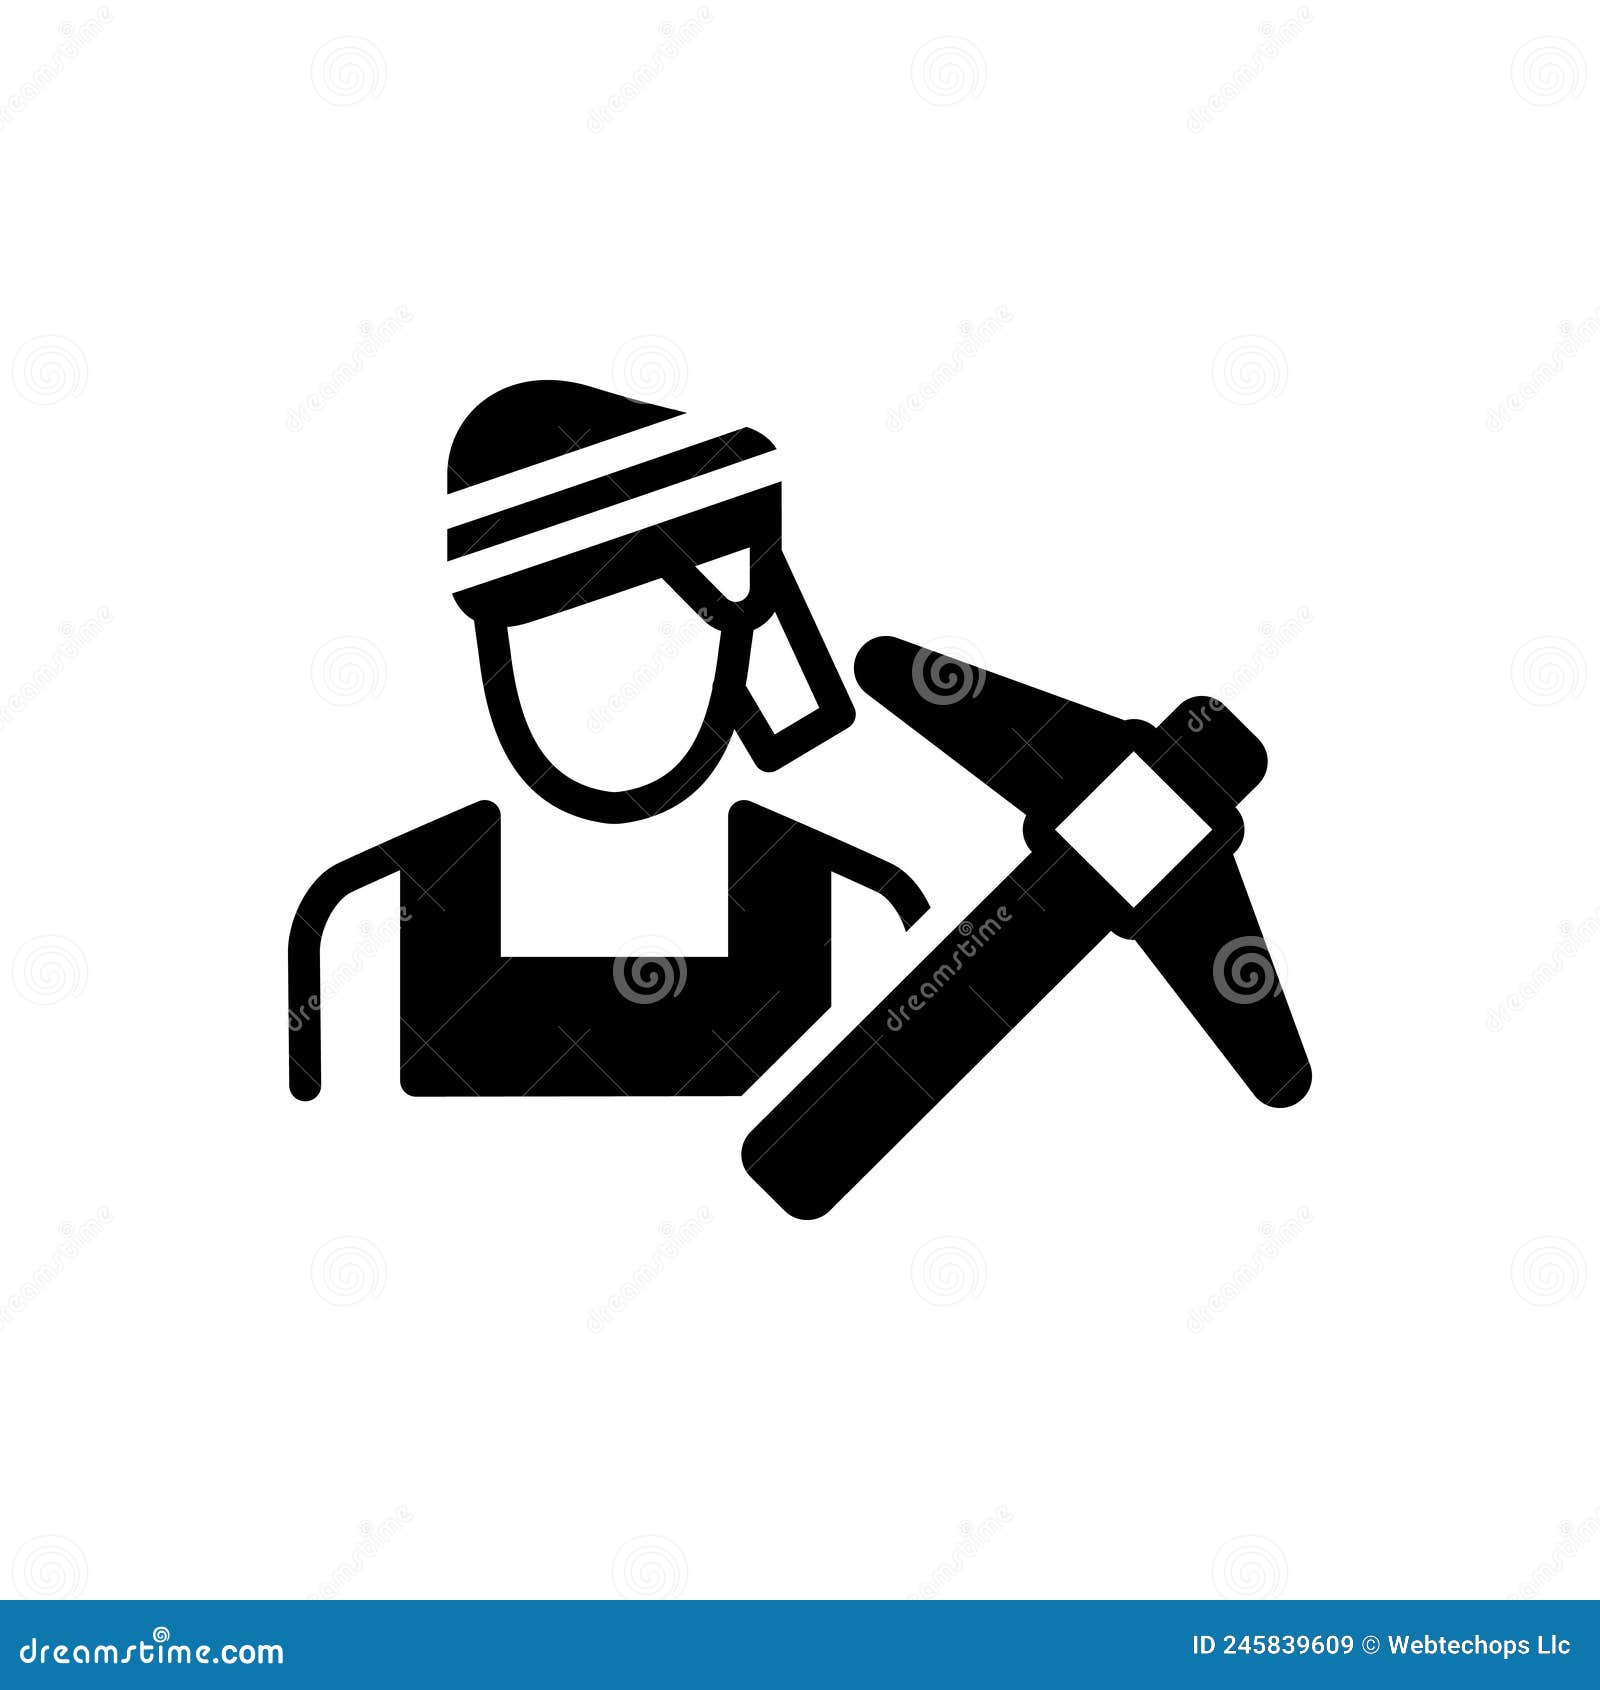 black solid icon for farmer, agriculturalist and grain